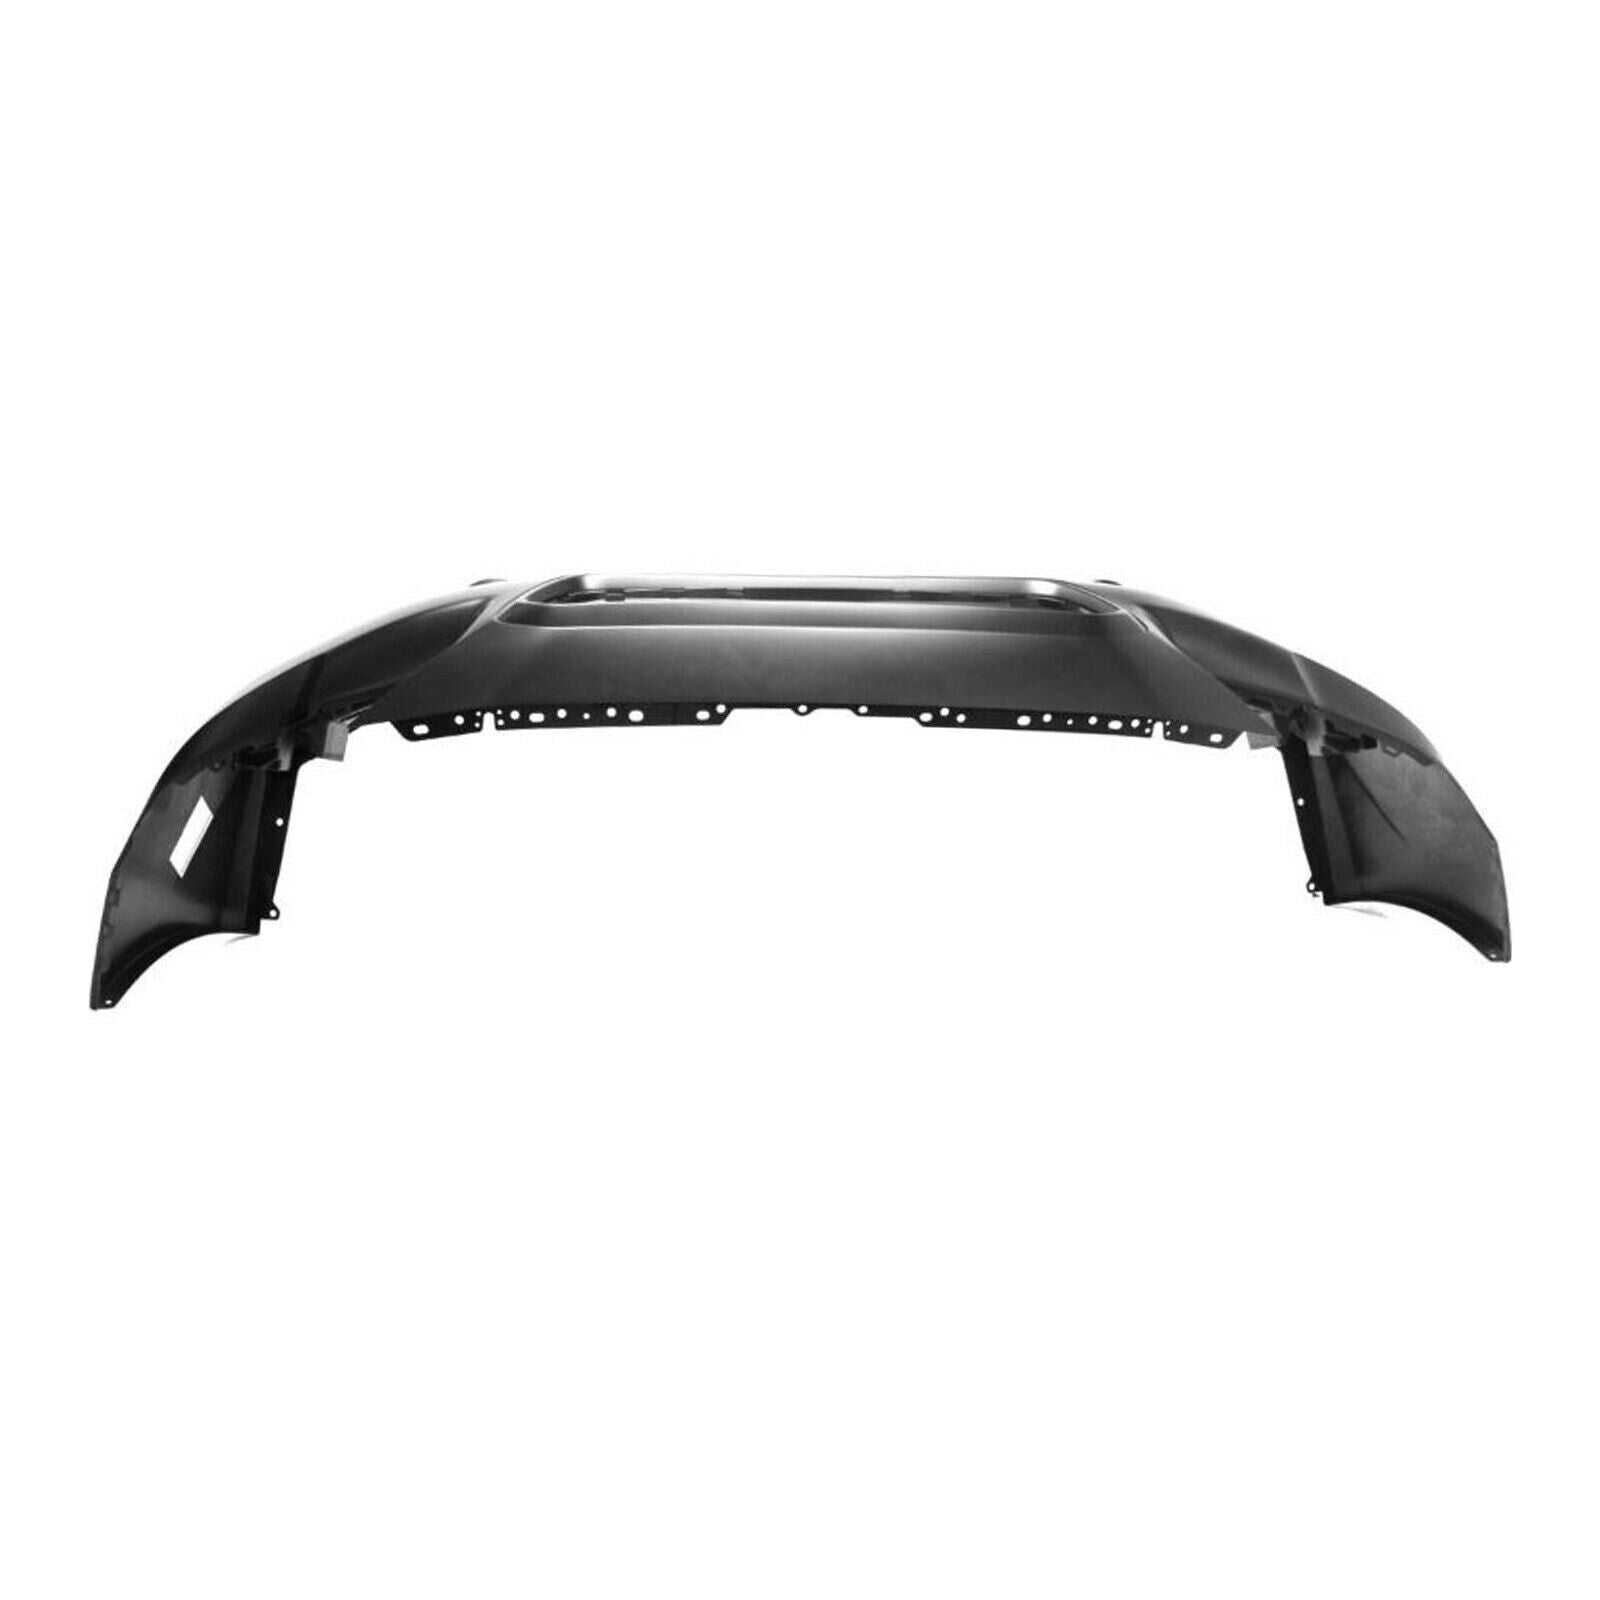 2015-2017 SUBARU WRX; Front Bumper Cover; Painted to Match